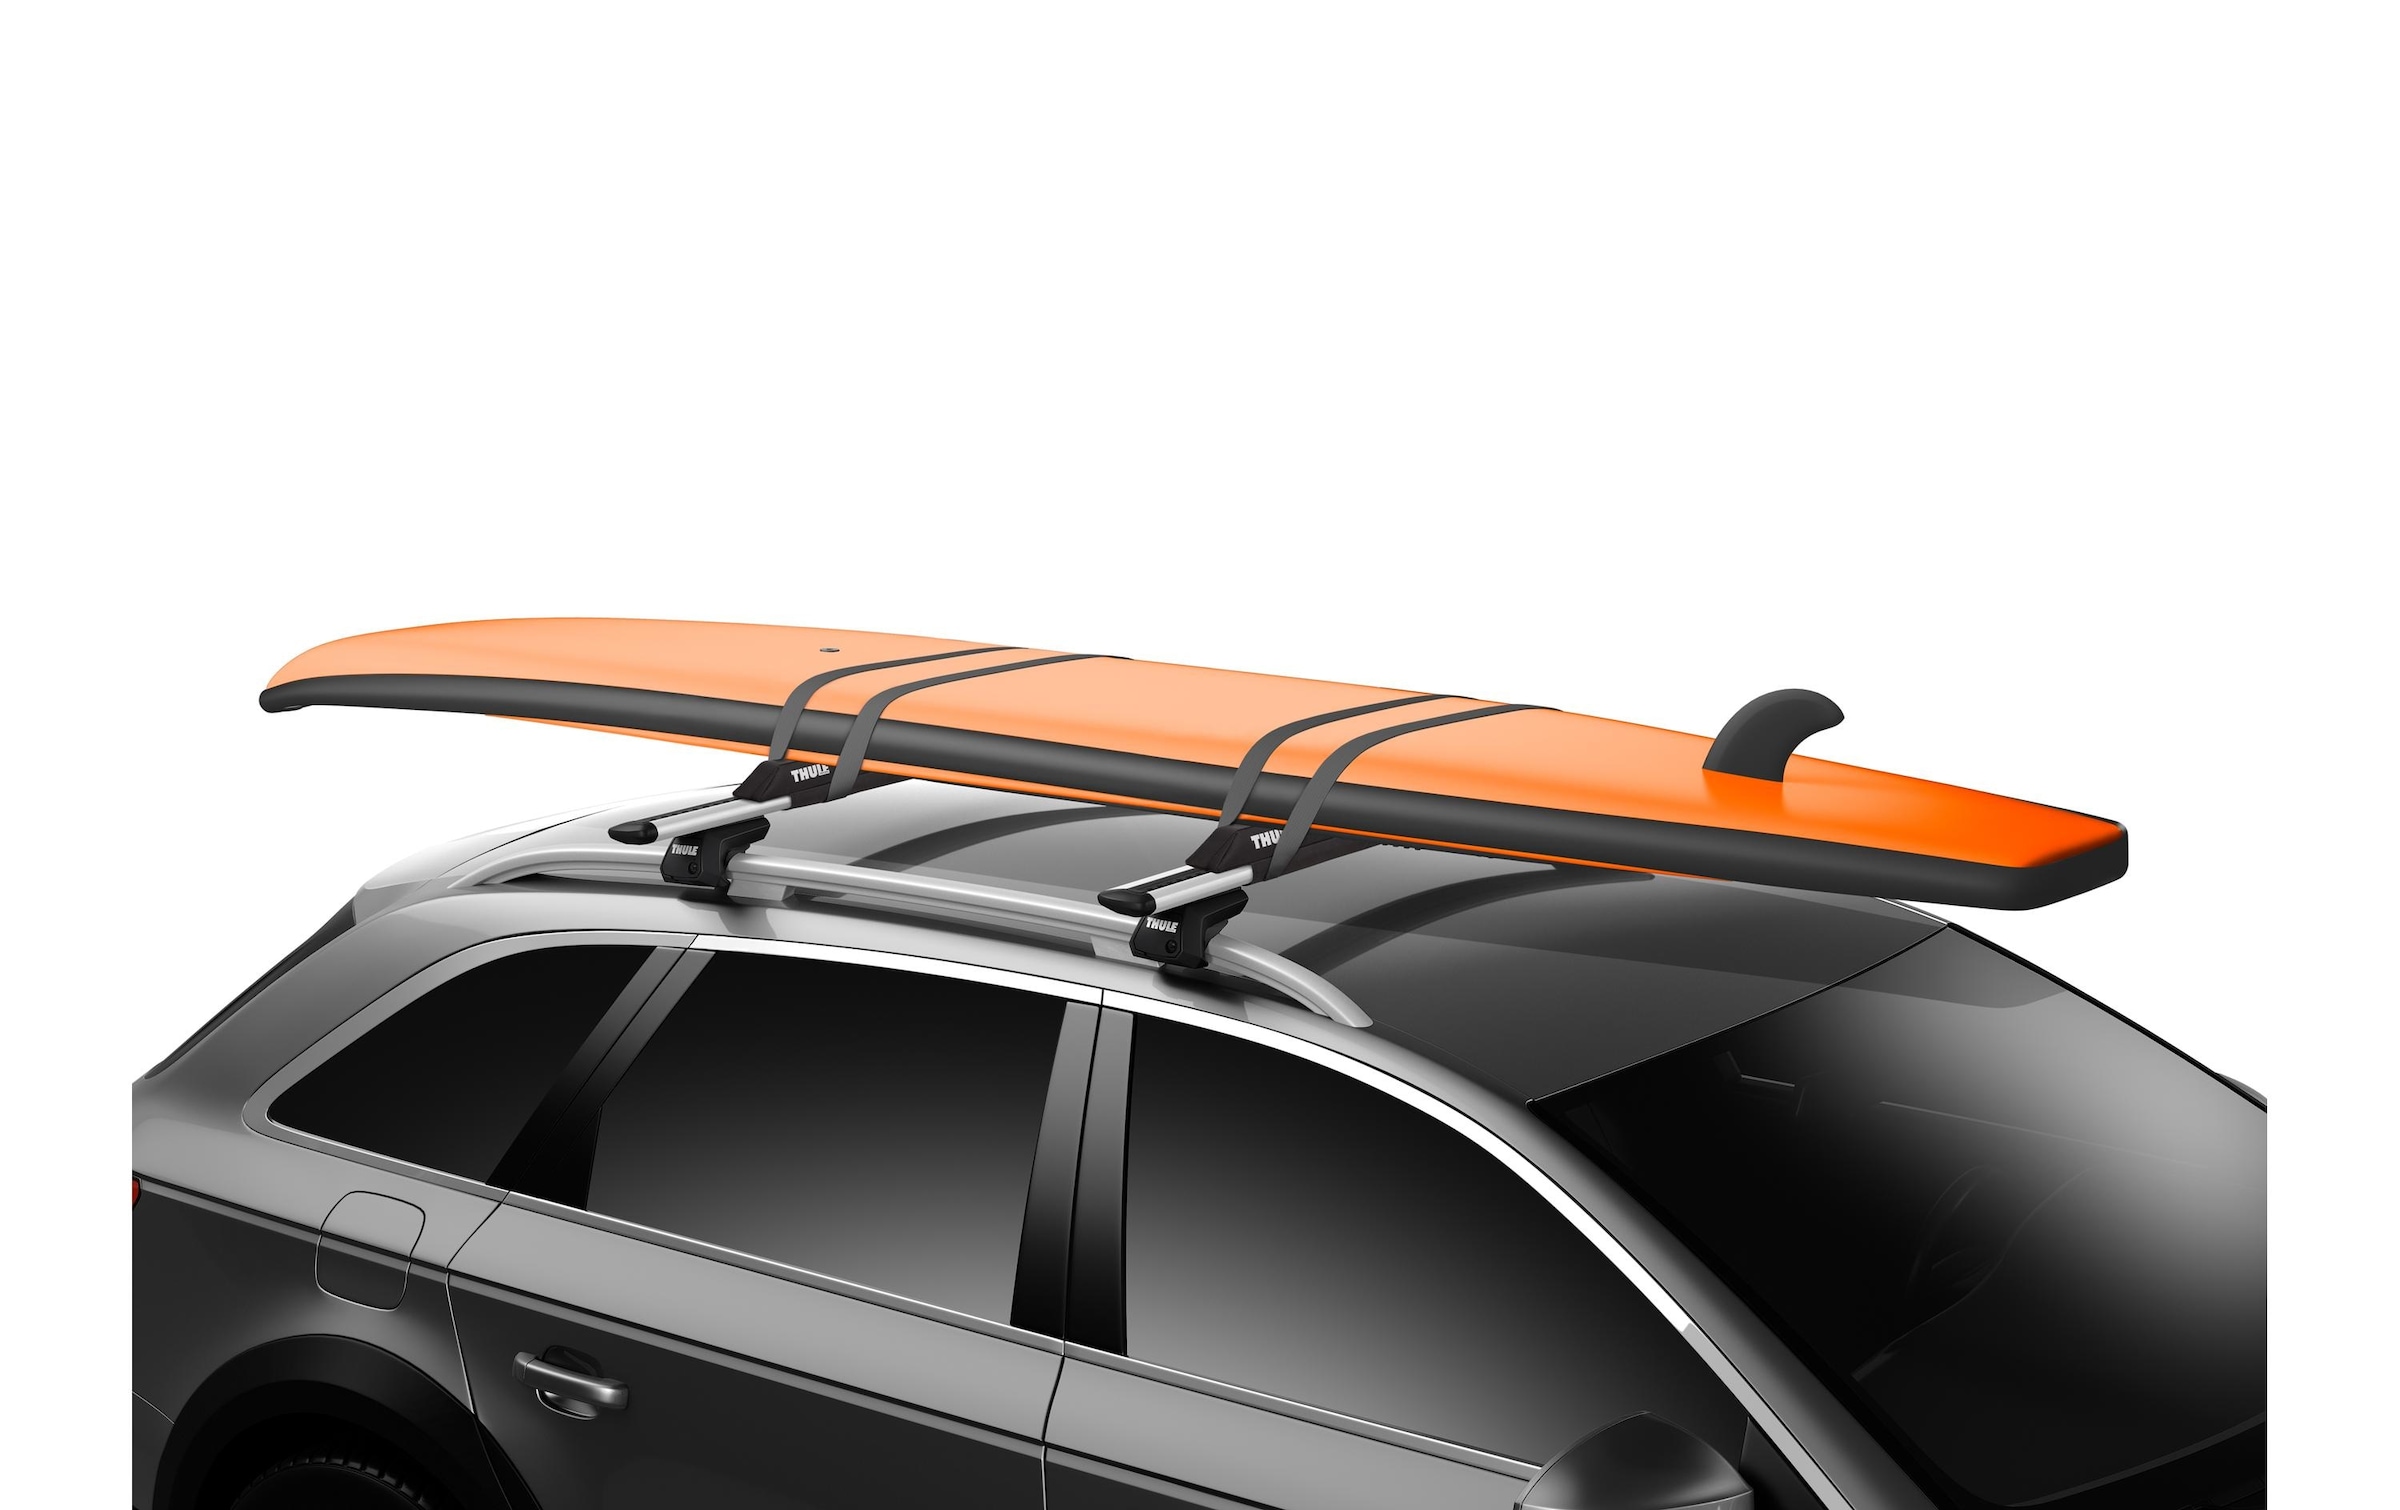 Thule Adapter »Surf Pad Wide«